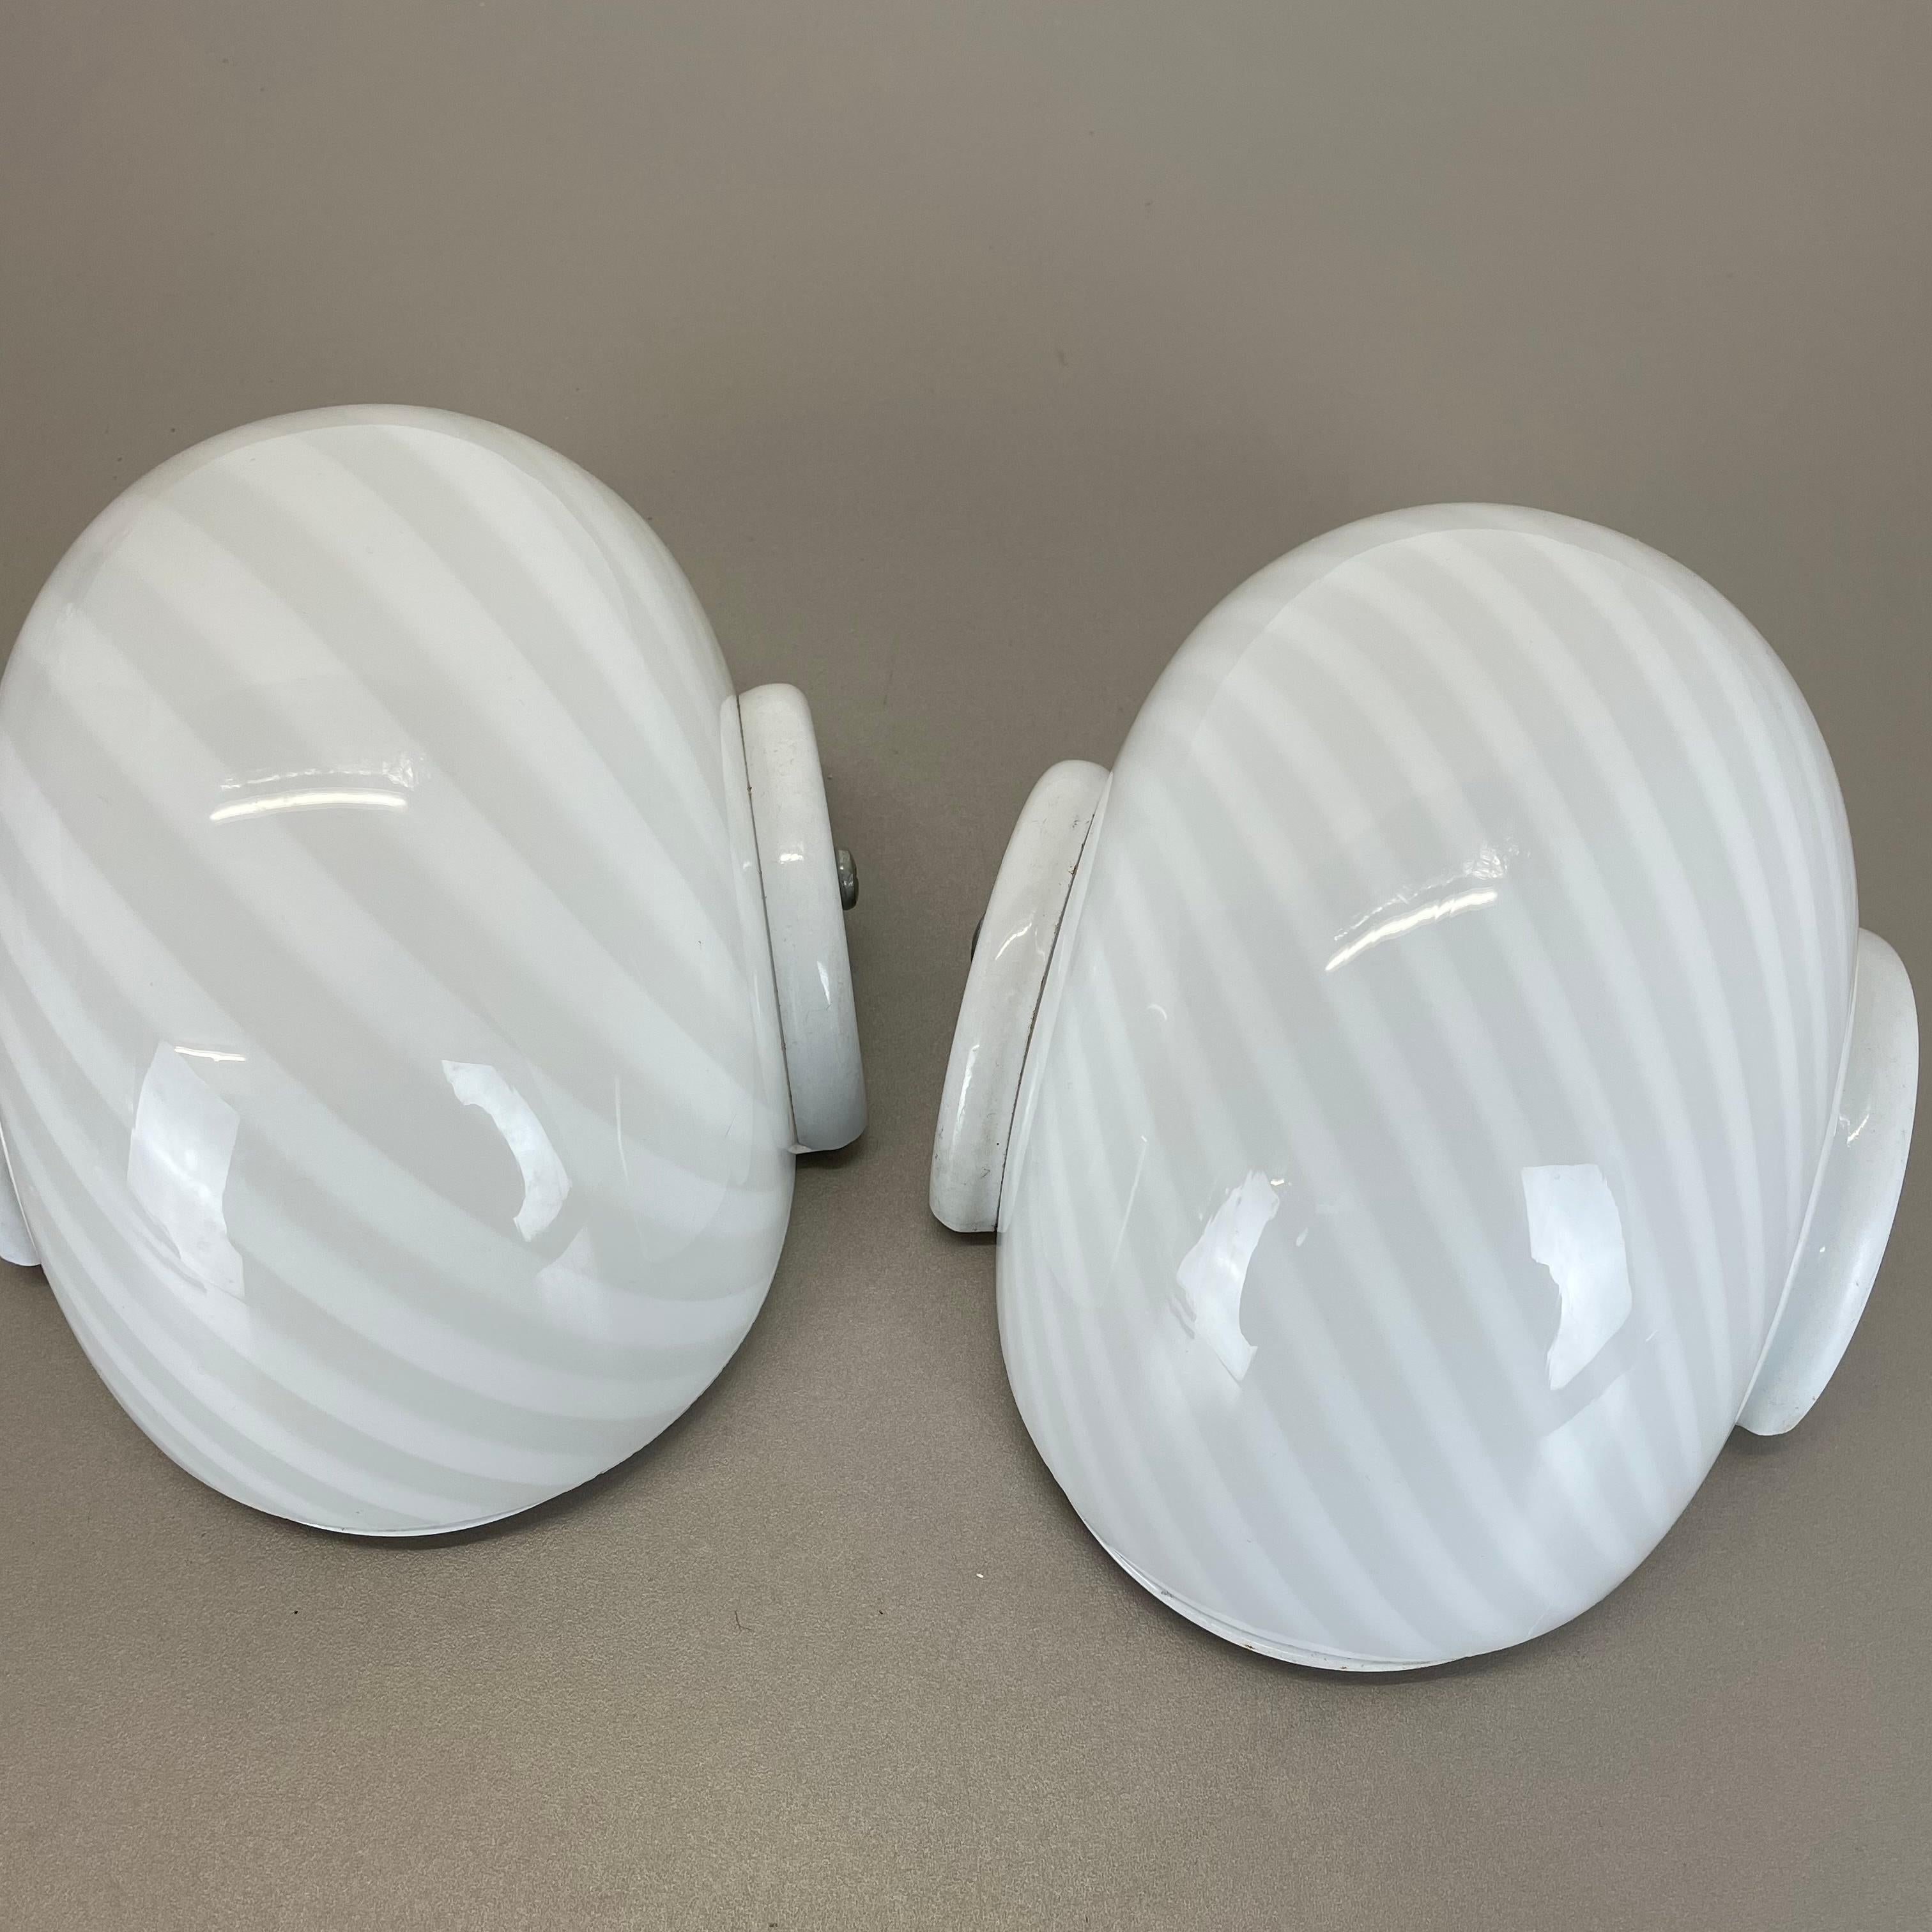 Set of Two Murano Swirl Glass Wall Light Sconces Vetri Murano, Italy, 1980s For Sale 3